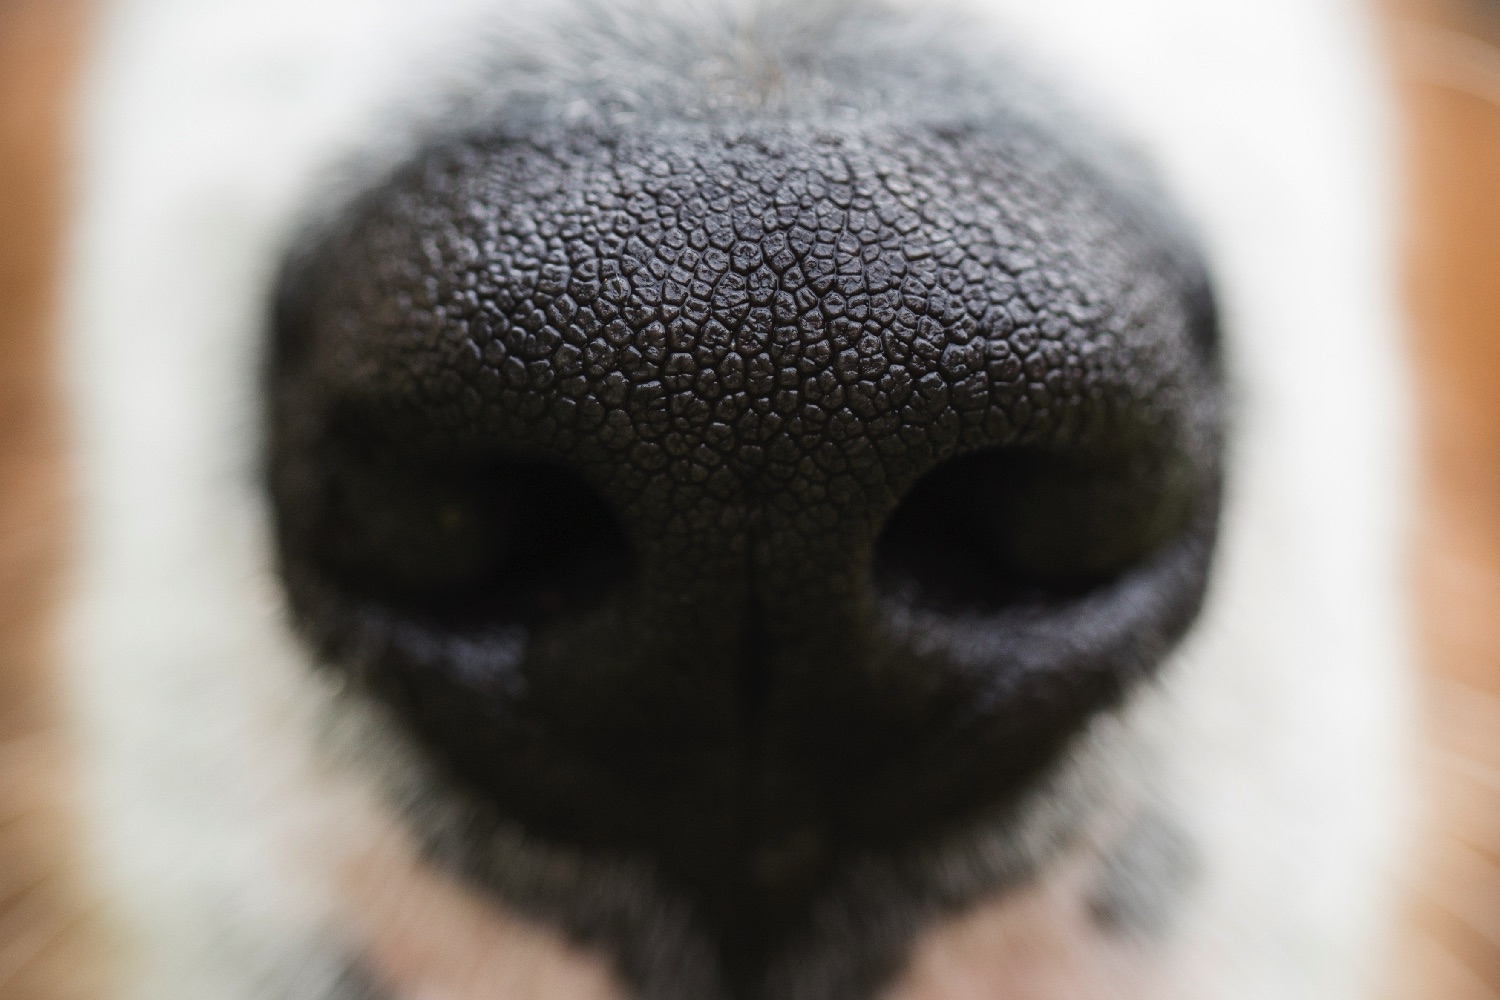 electronic nose sniffs stool gettyimages 836200750